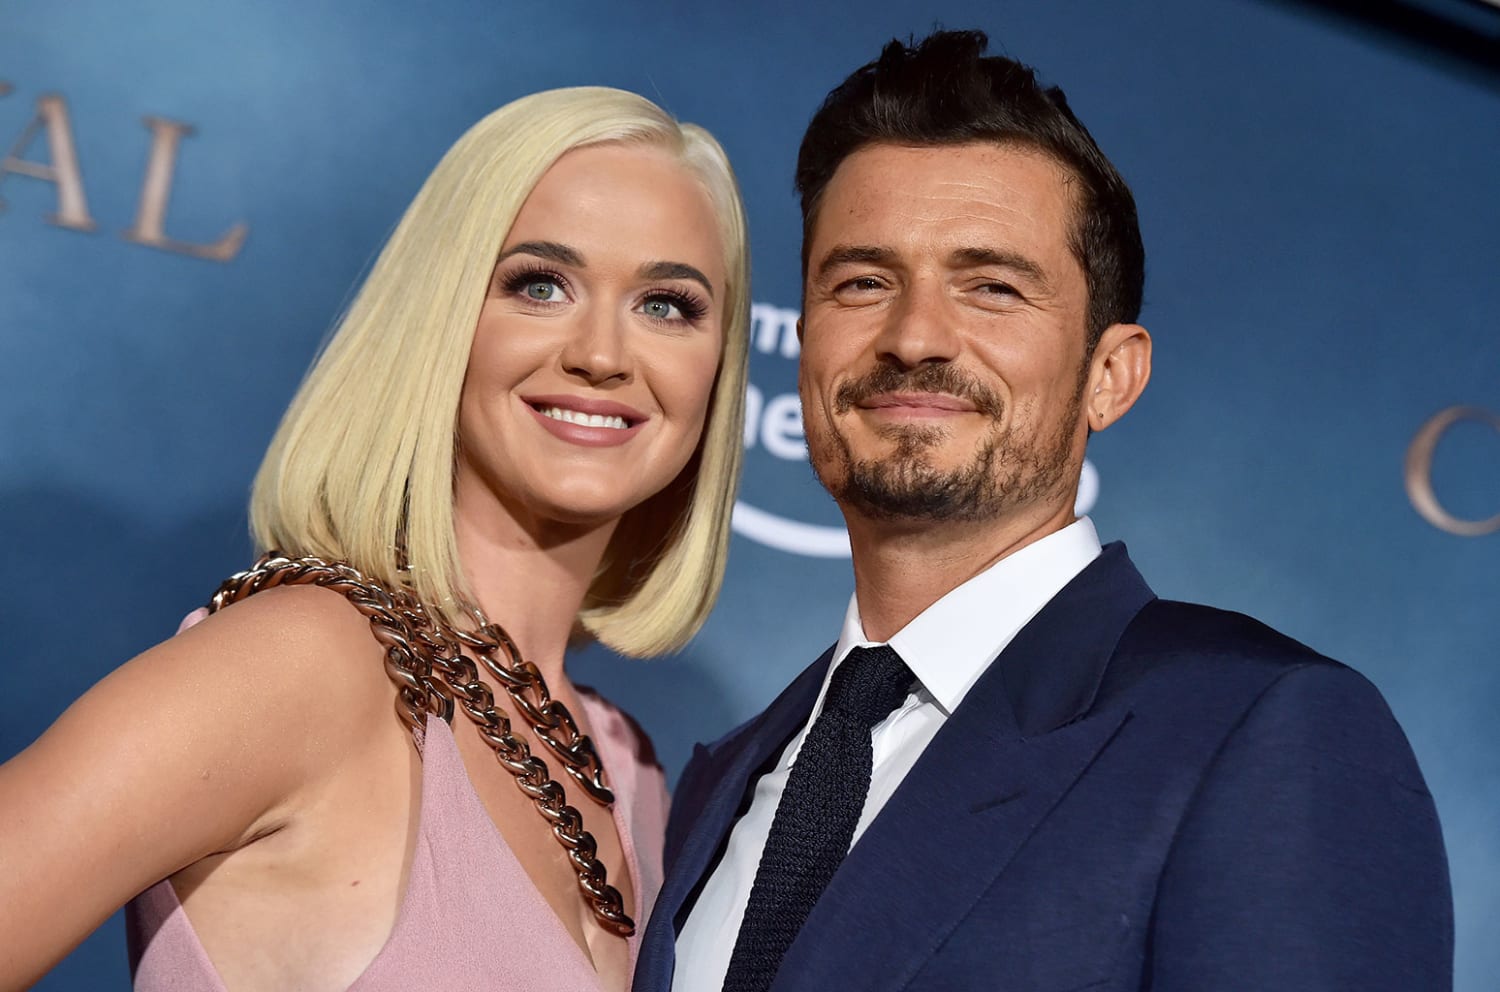 Katy Perry Sends Sweet Birthday Message to Orlando Bloom: 'It's His Heart, So Pure'